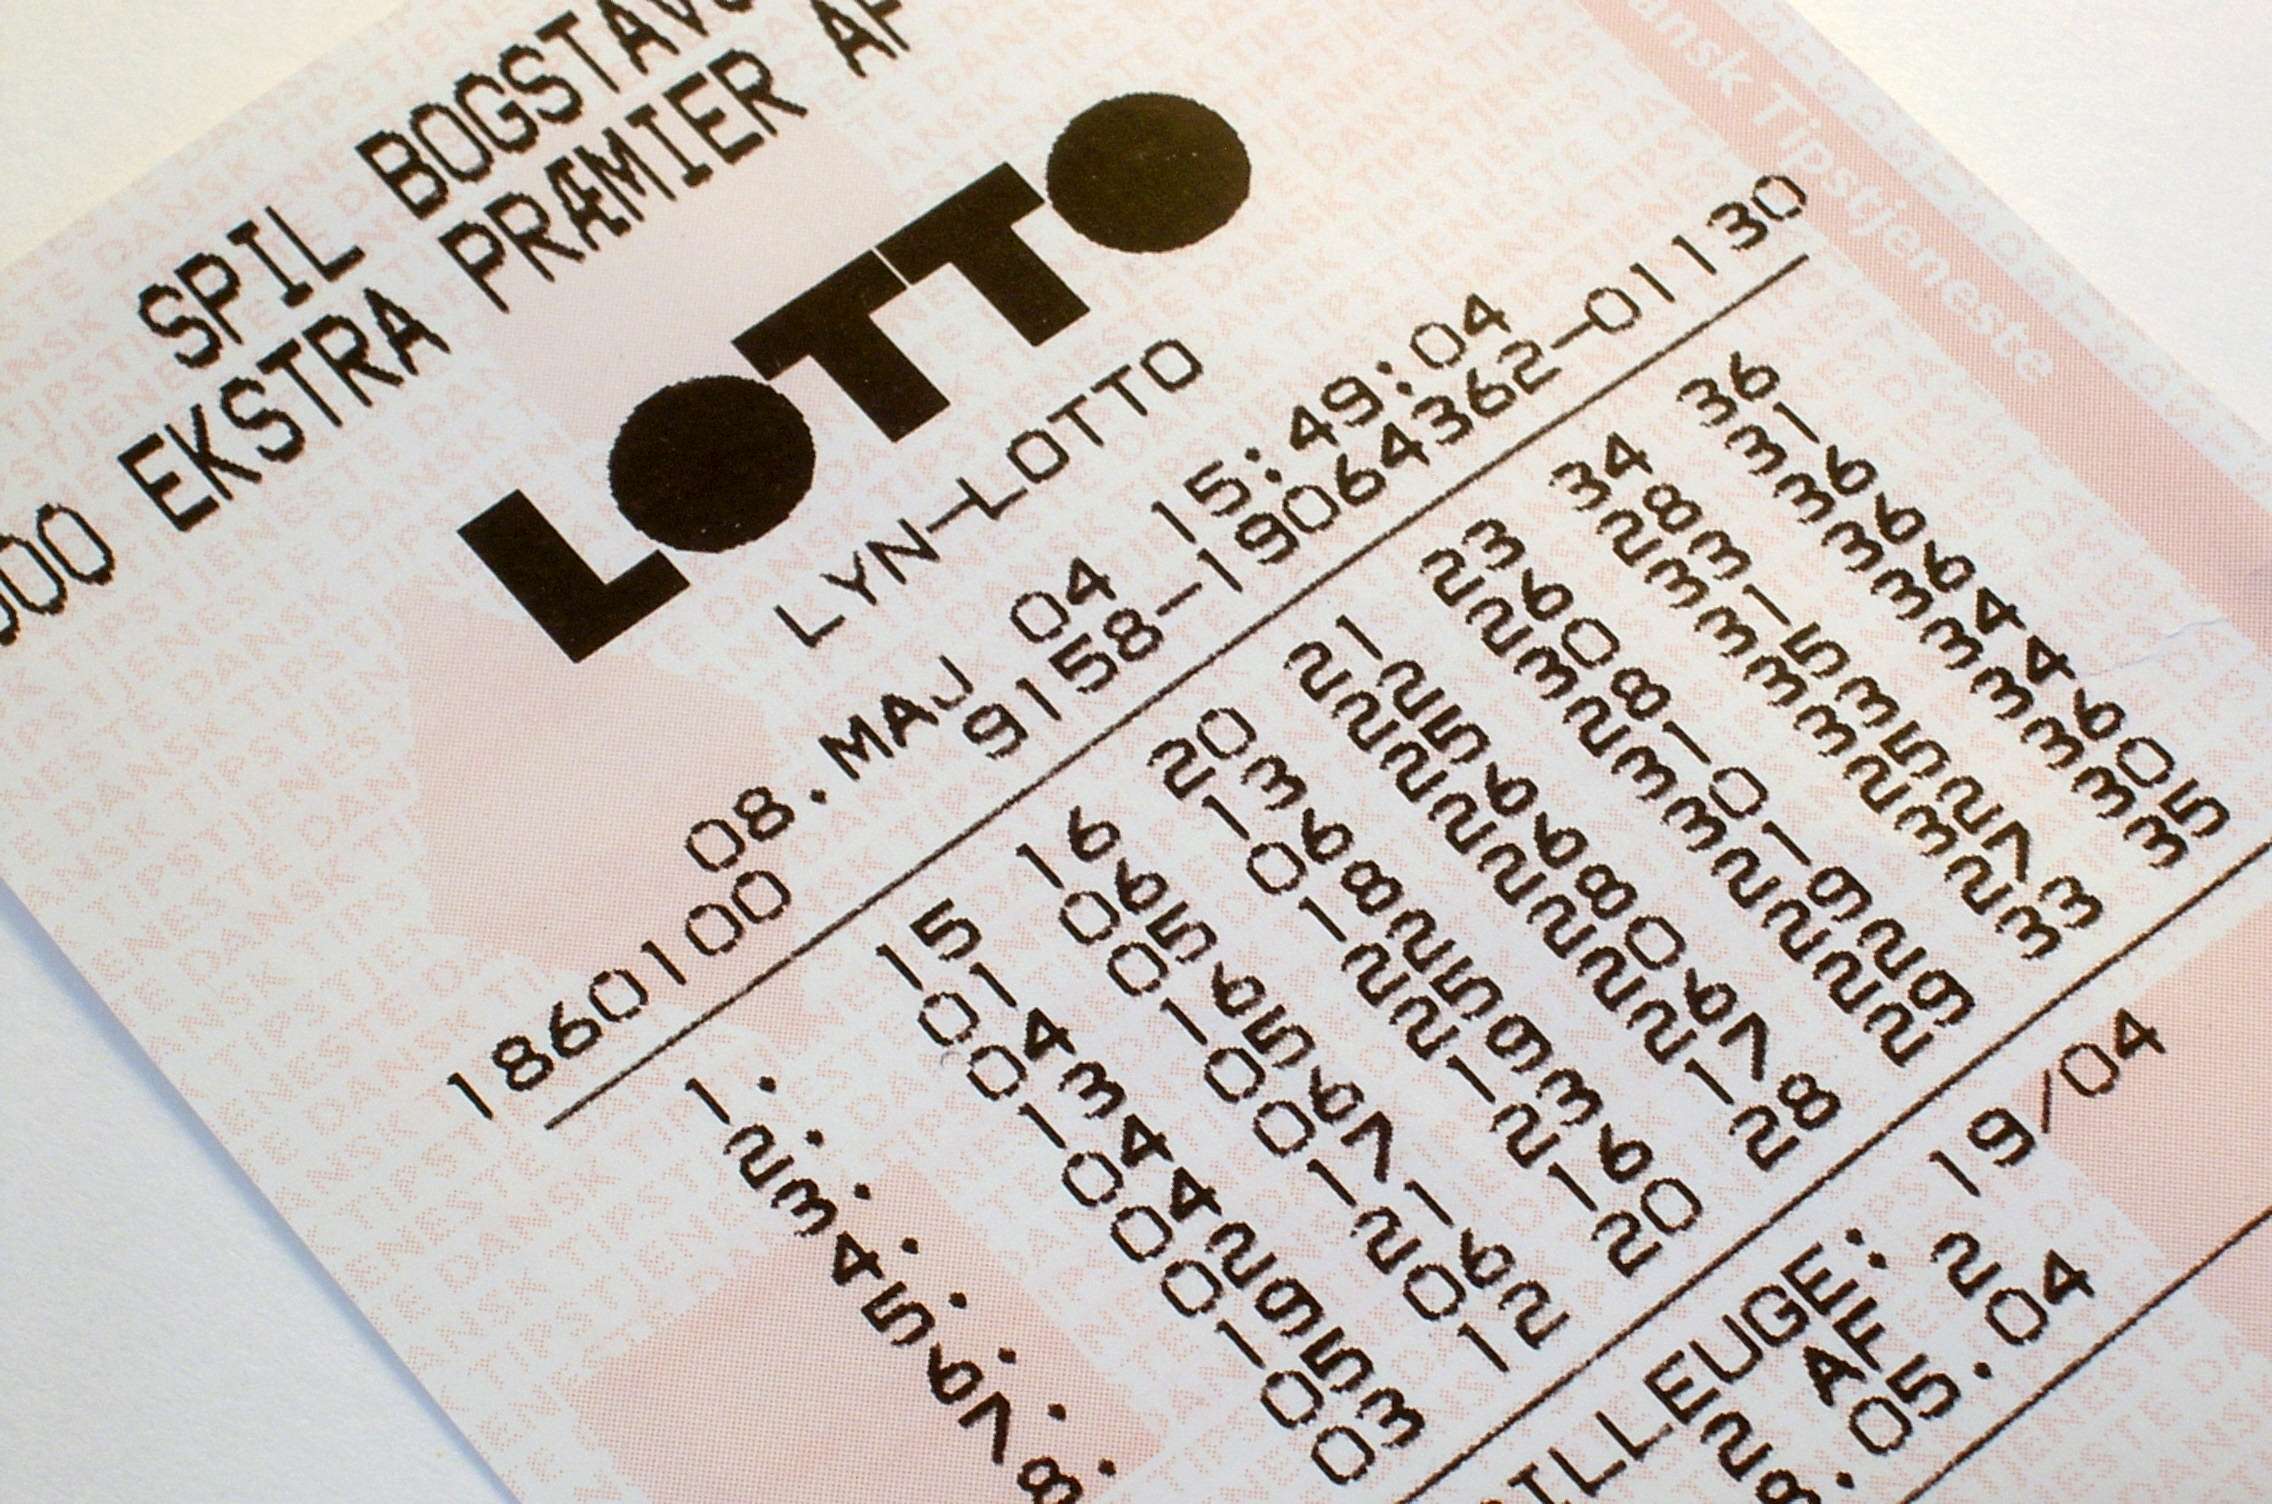 How To Play Michigan Lottery Online
